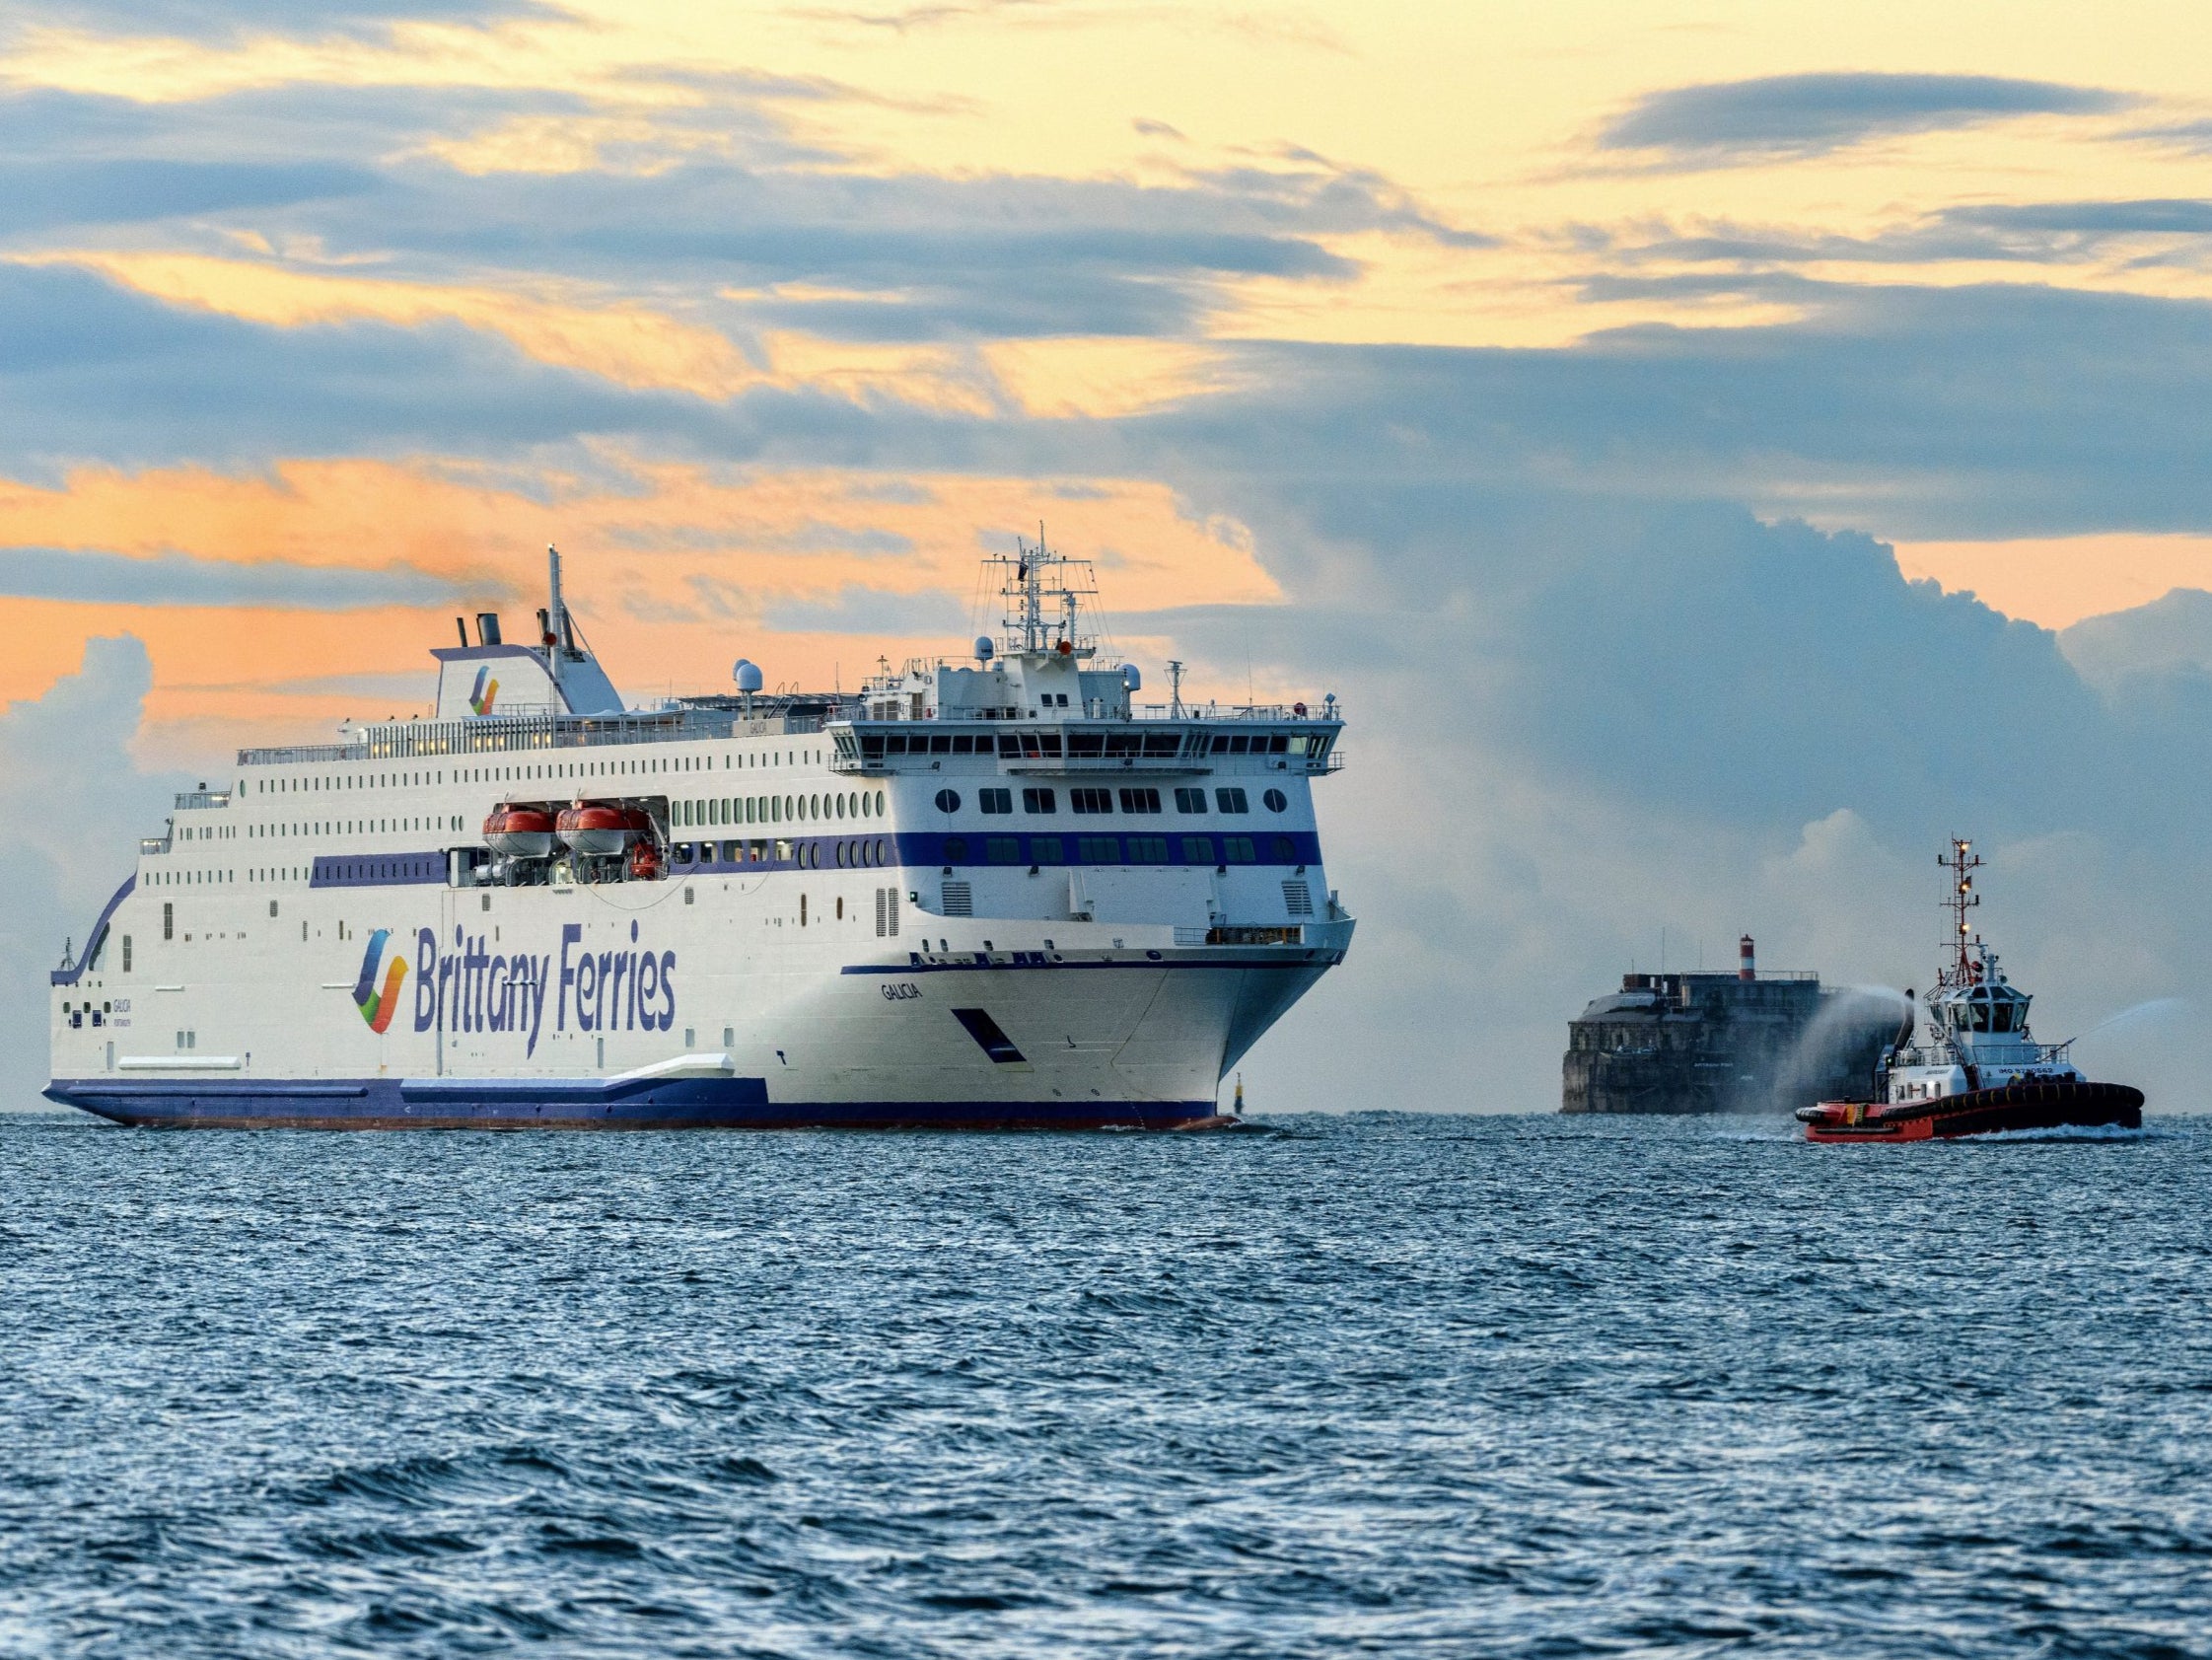 The Brittany Ferries ‘Galicia’ ship